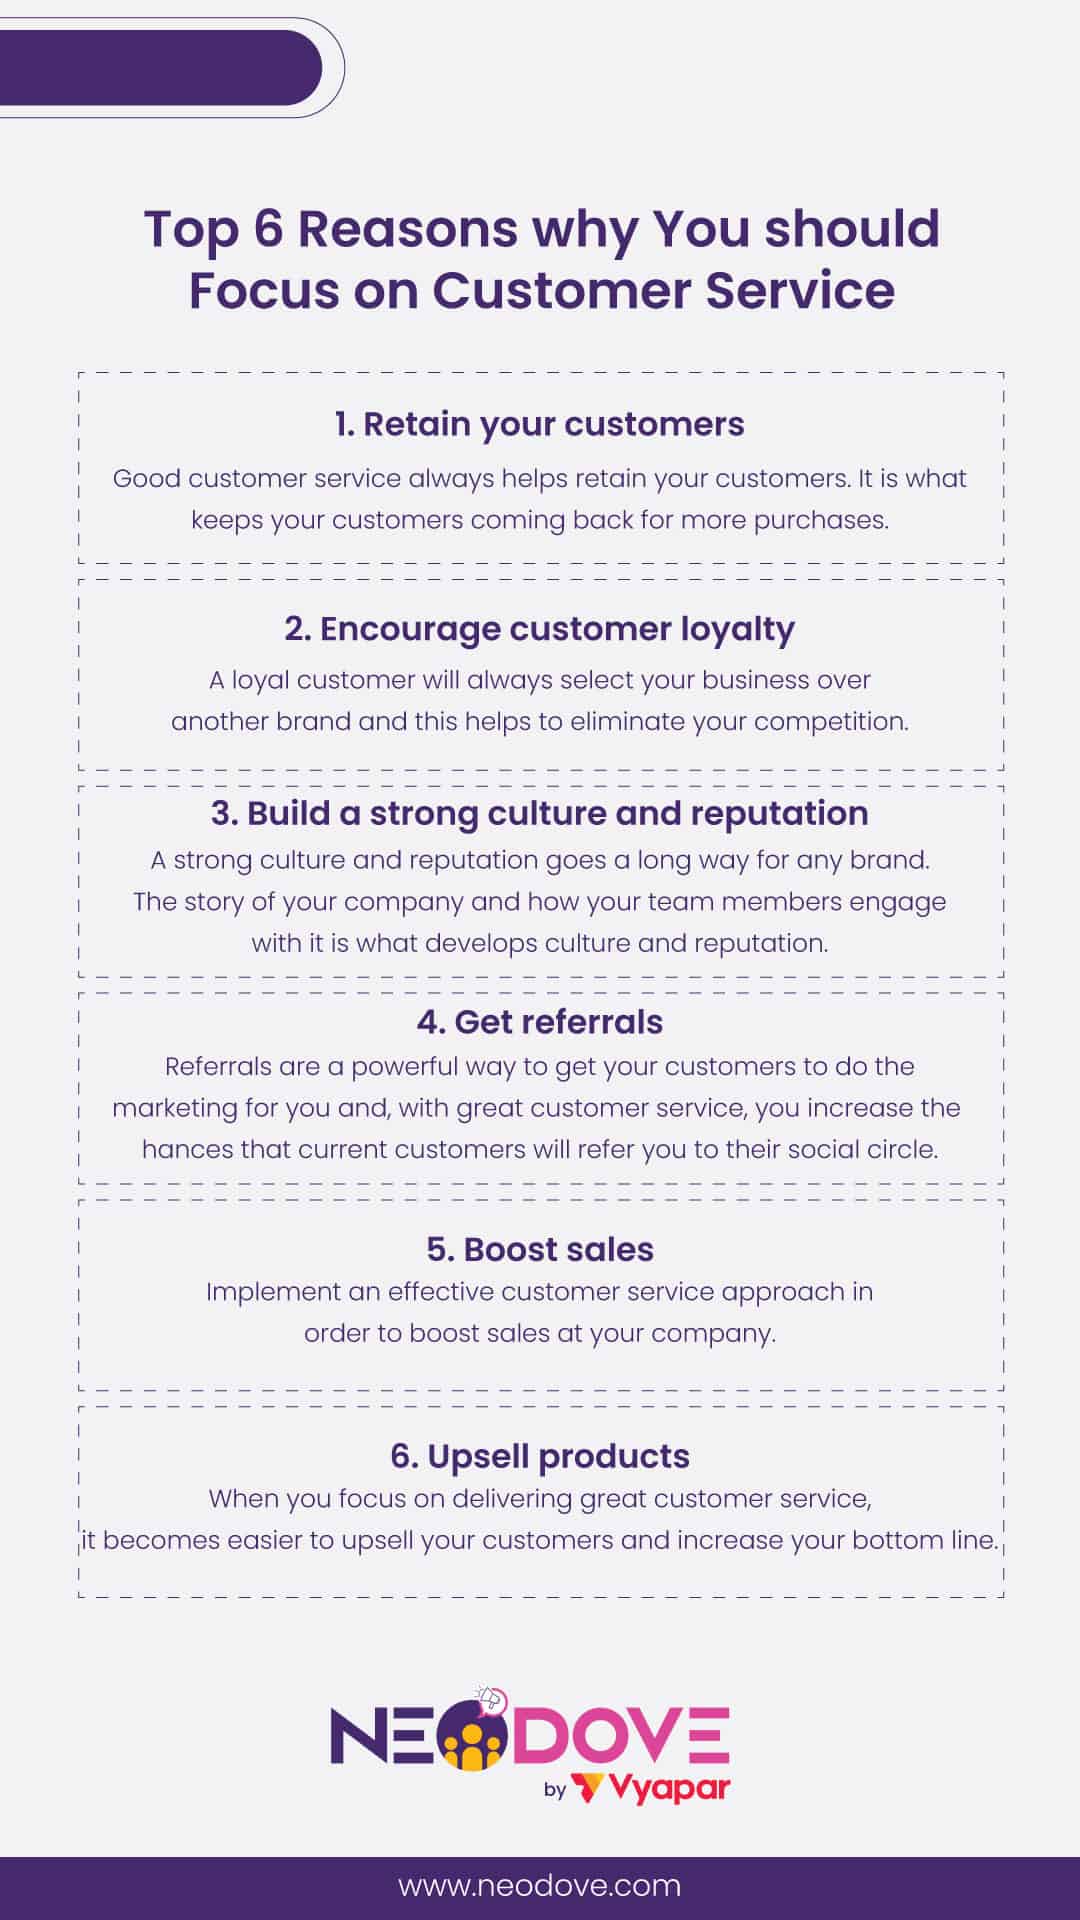 Make Legendary Customer Service Part of Your Company Culture 